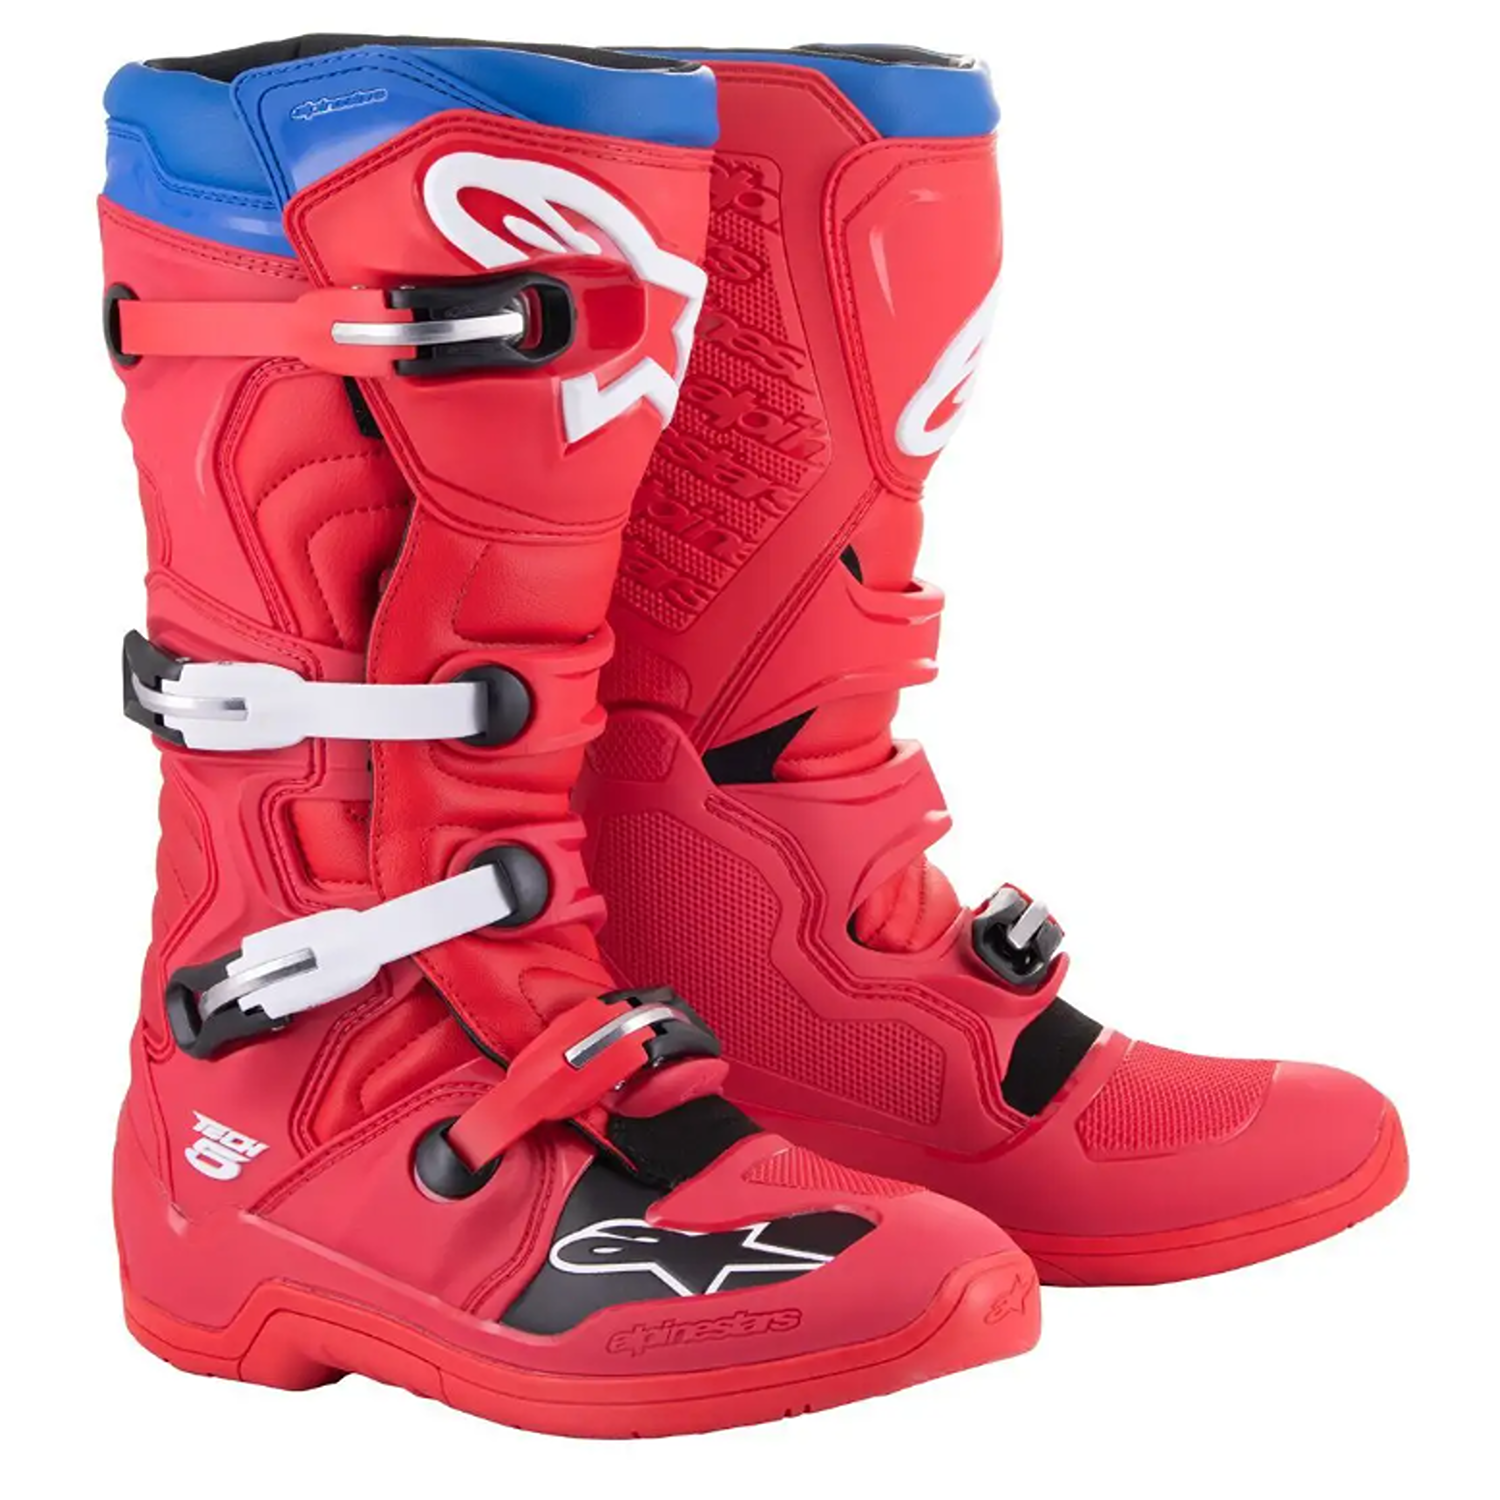 Image of EU Alpinestars Tech 5 Boots Bright Red Dark Red Blue Taille US 10